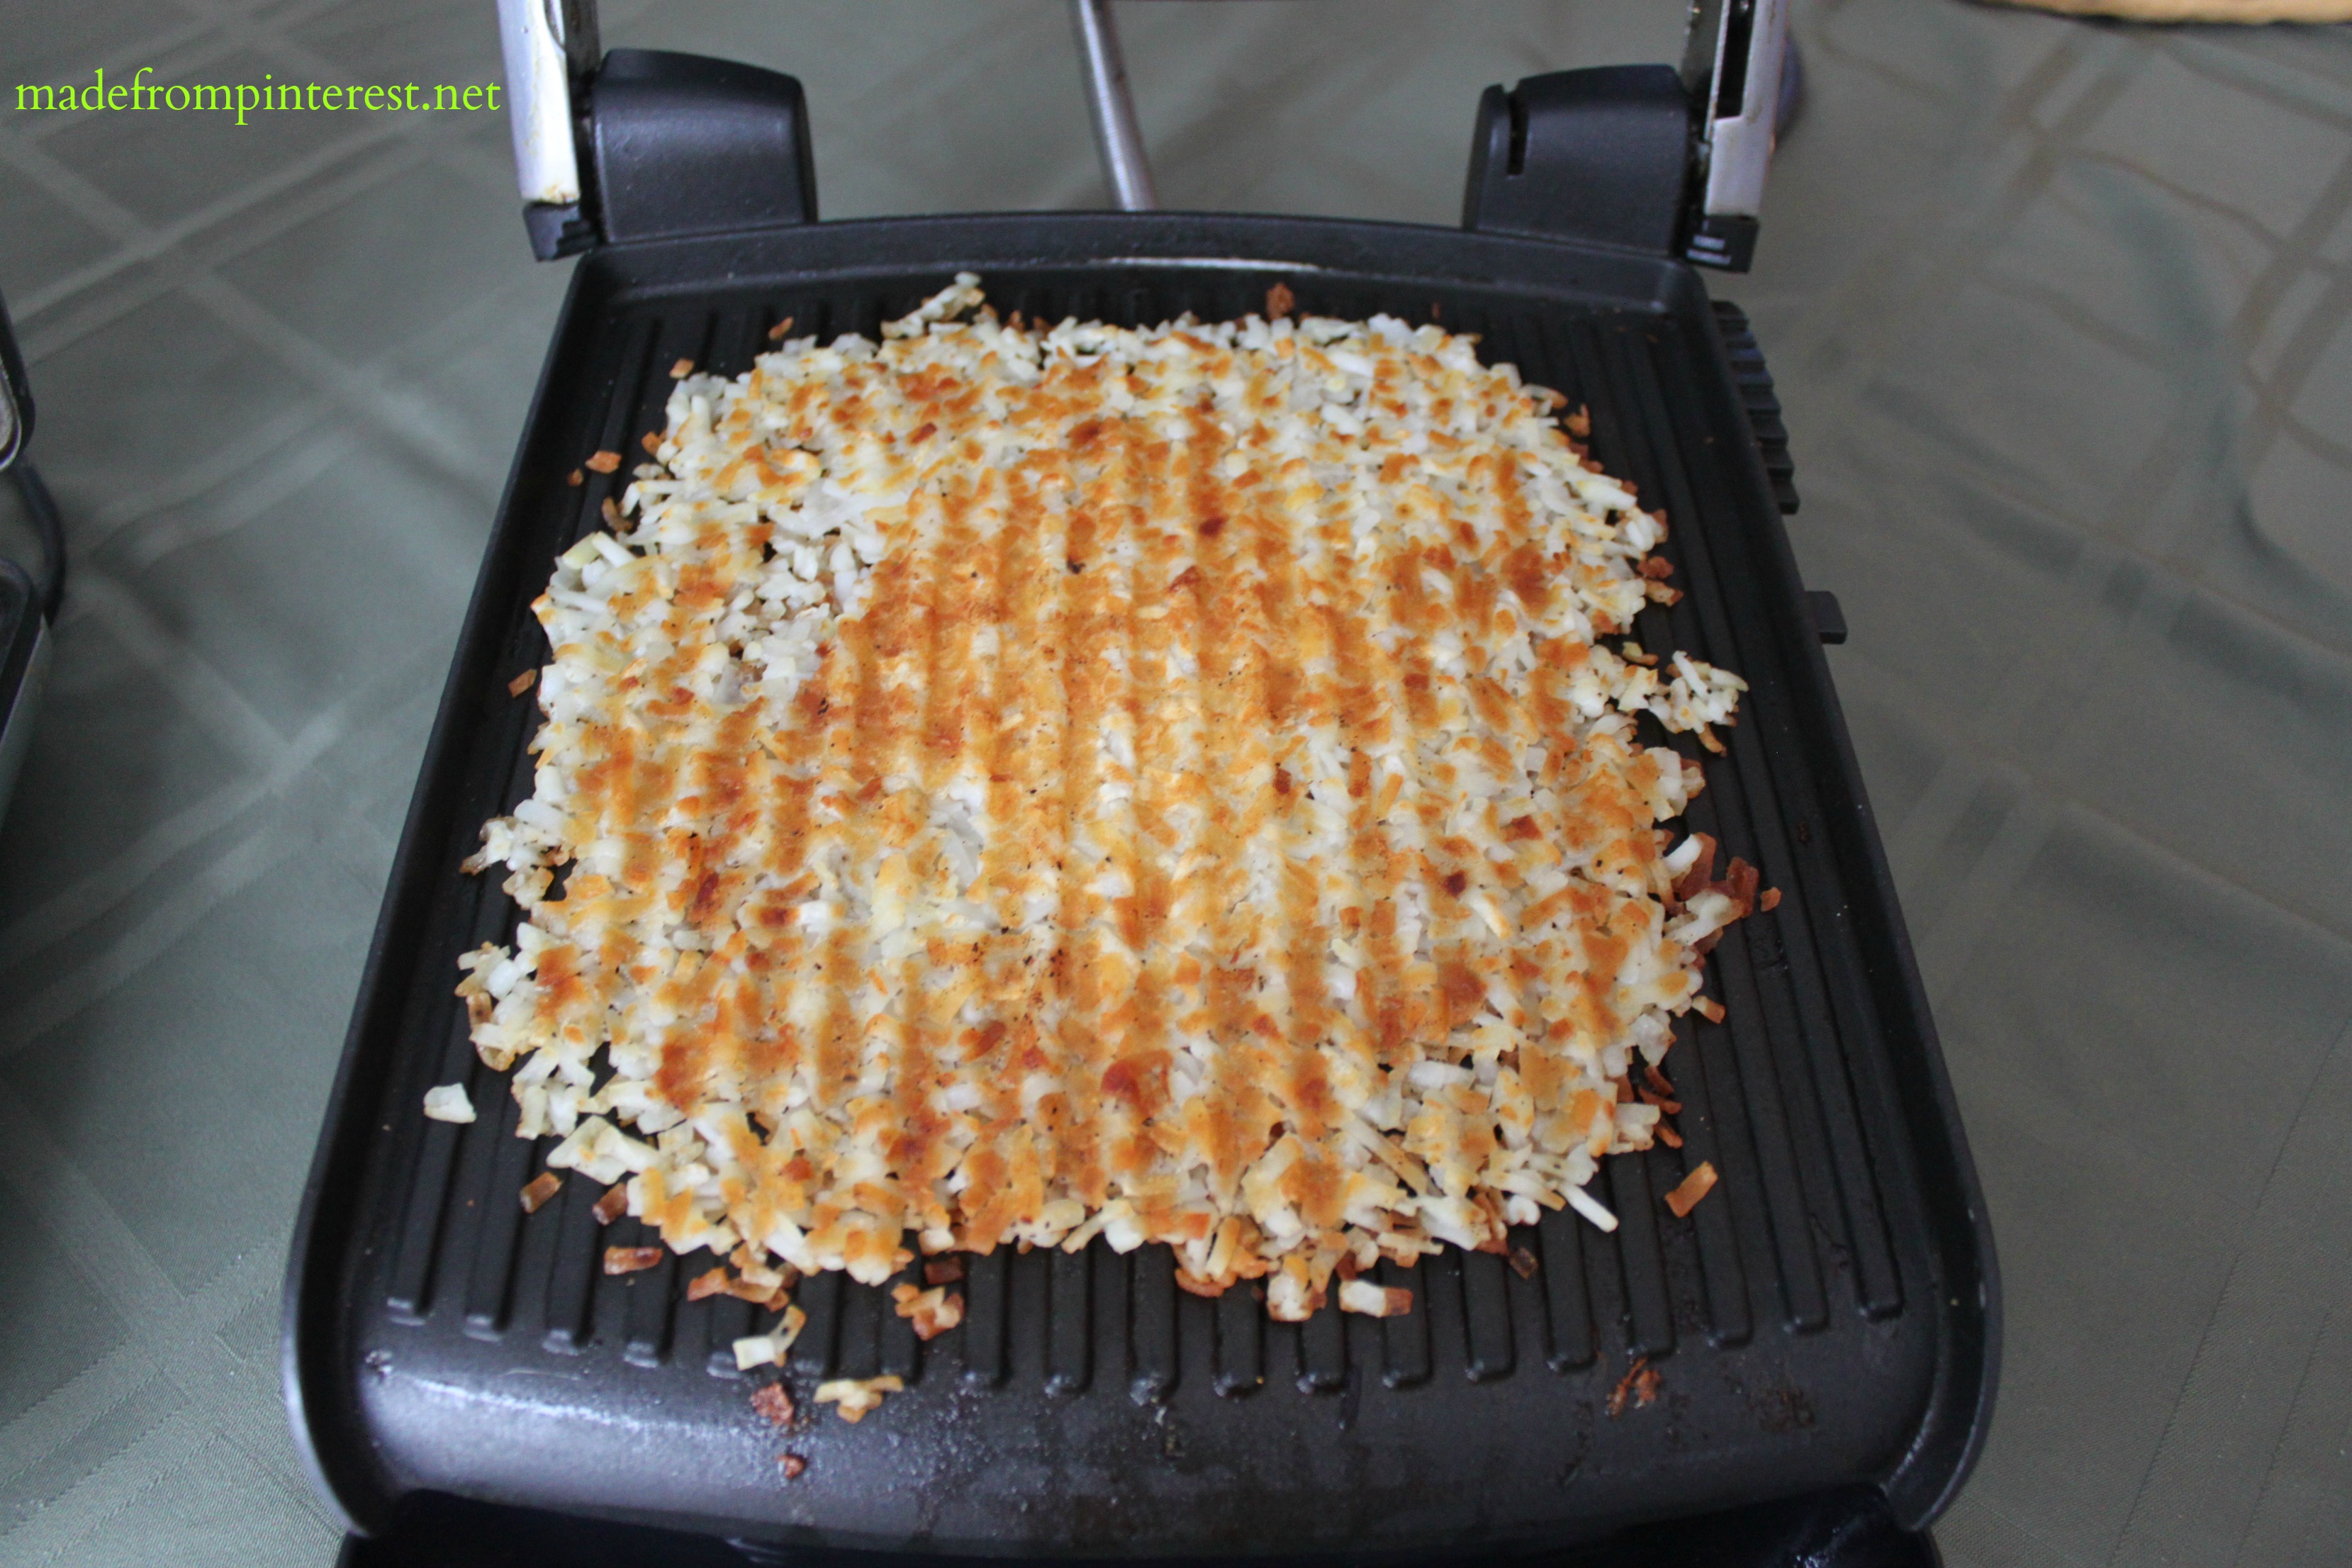 Panini Press Hash Browns @madefrompinterest.net